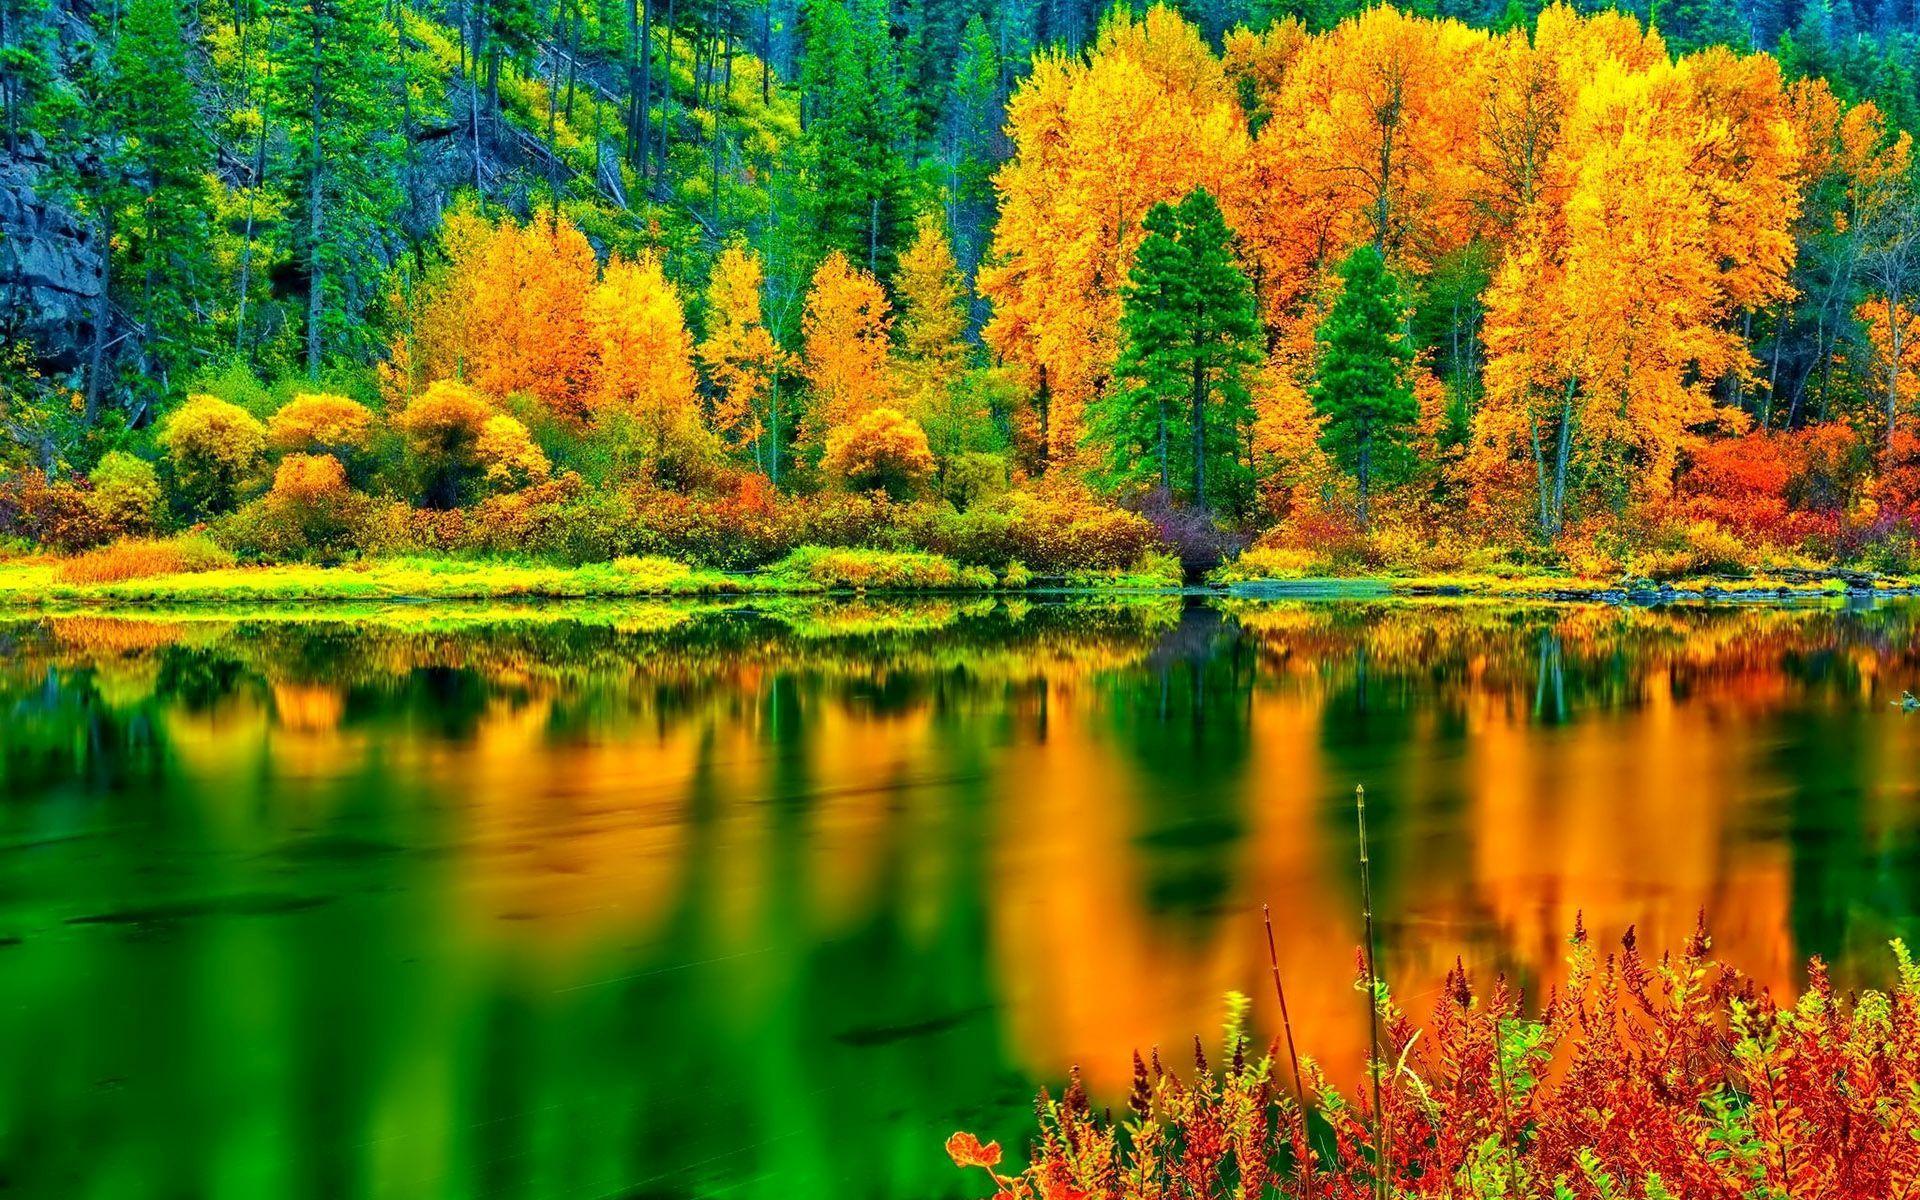 Hd Breathtaking Autumn Colors Wallpaper - Orange And Green In Nature -  1920x1200 Wallpaper 